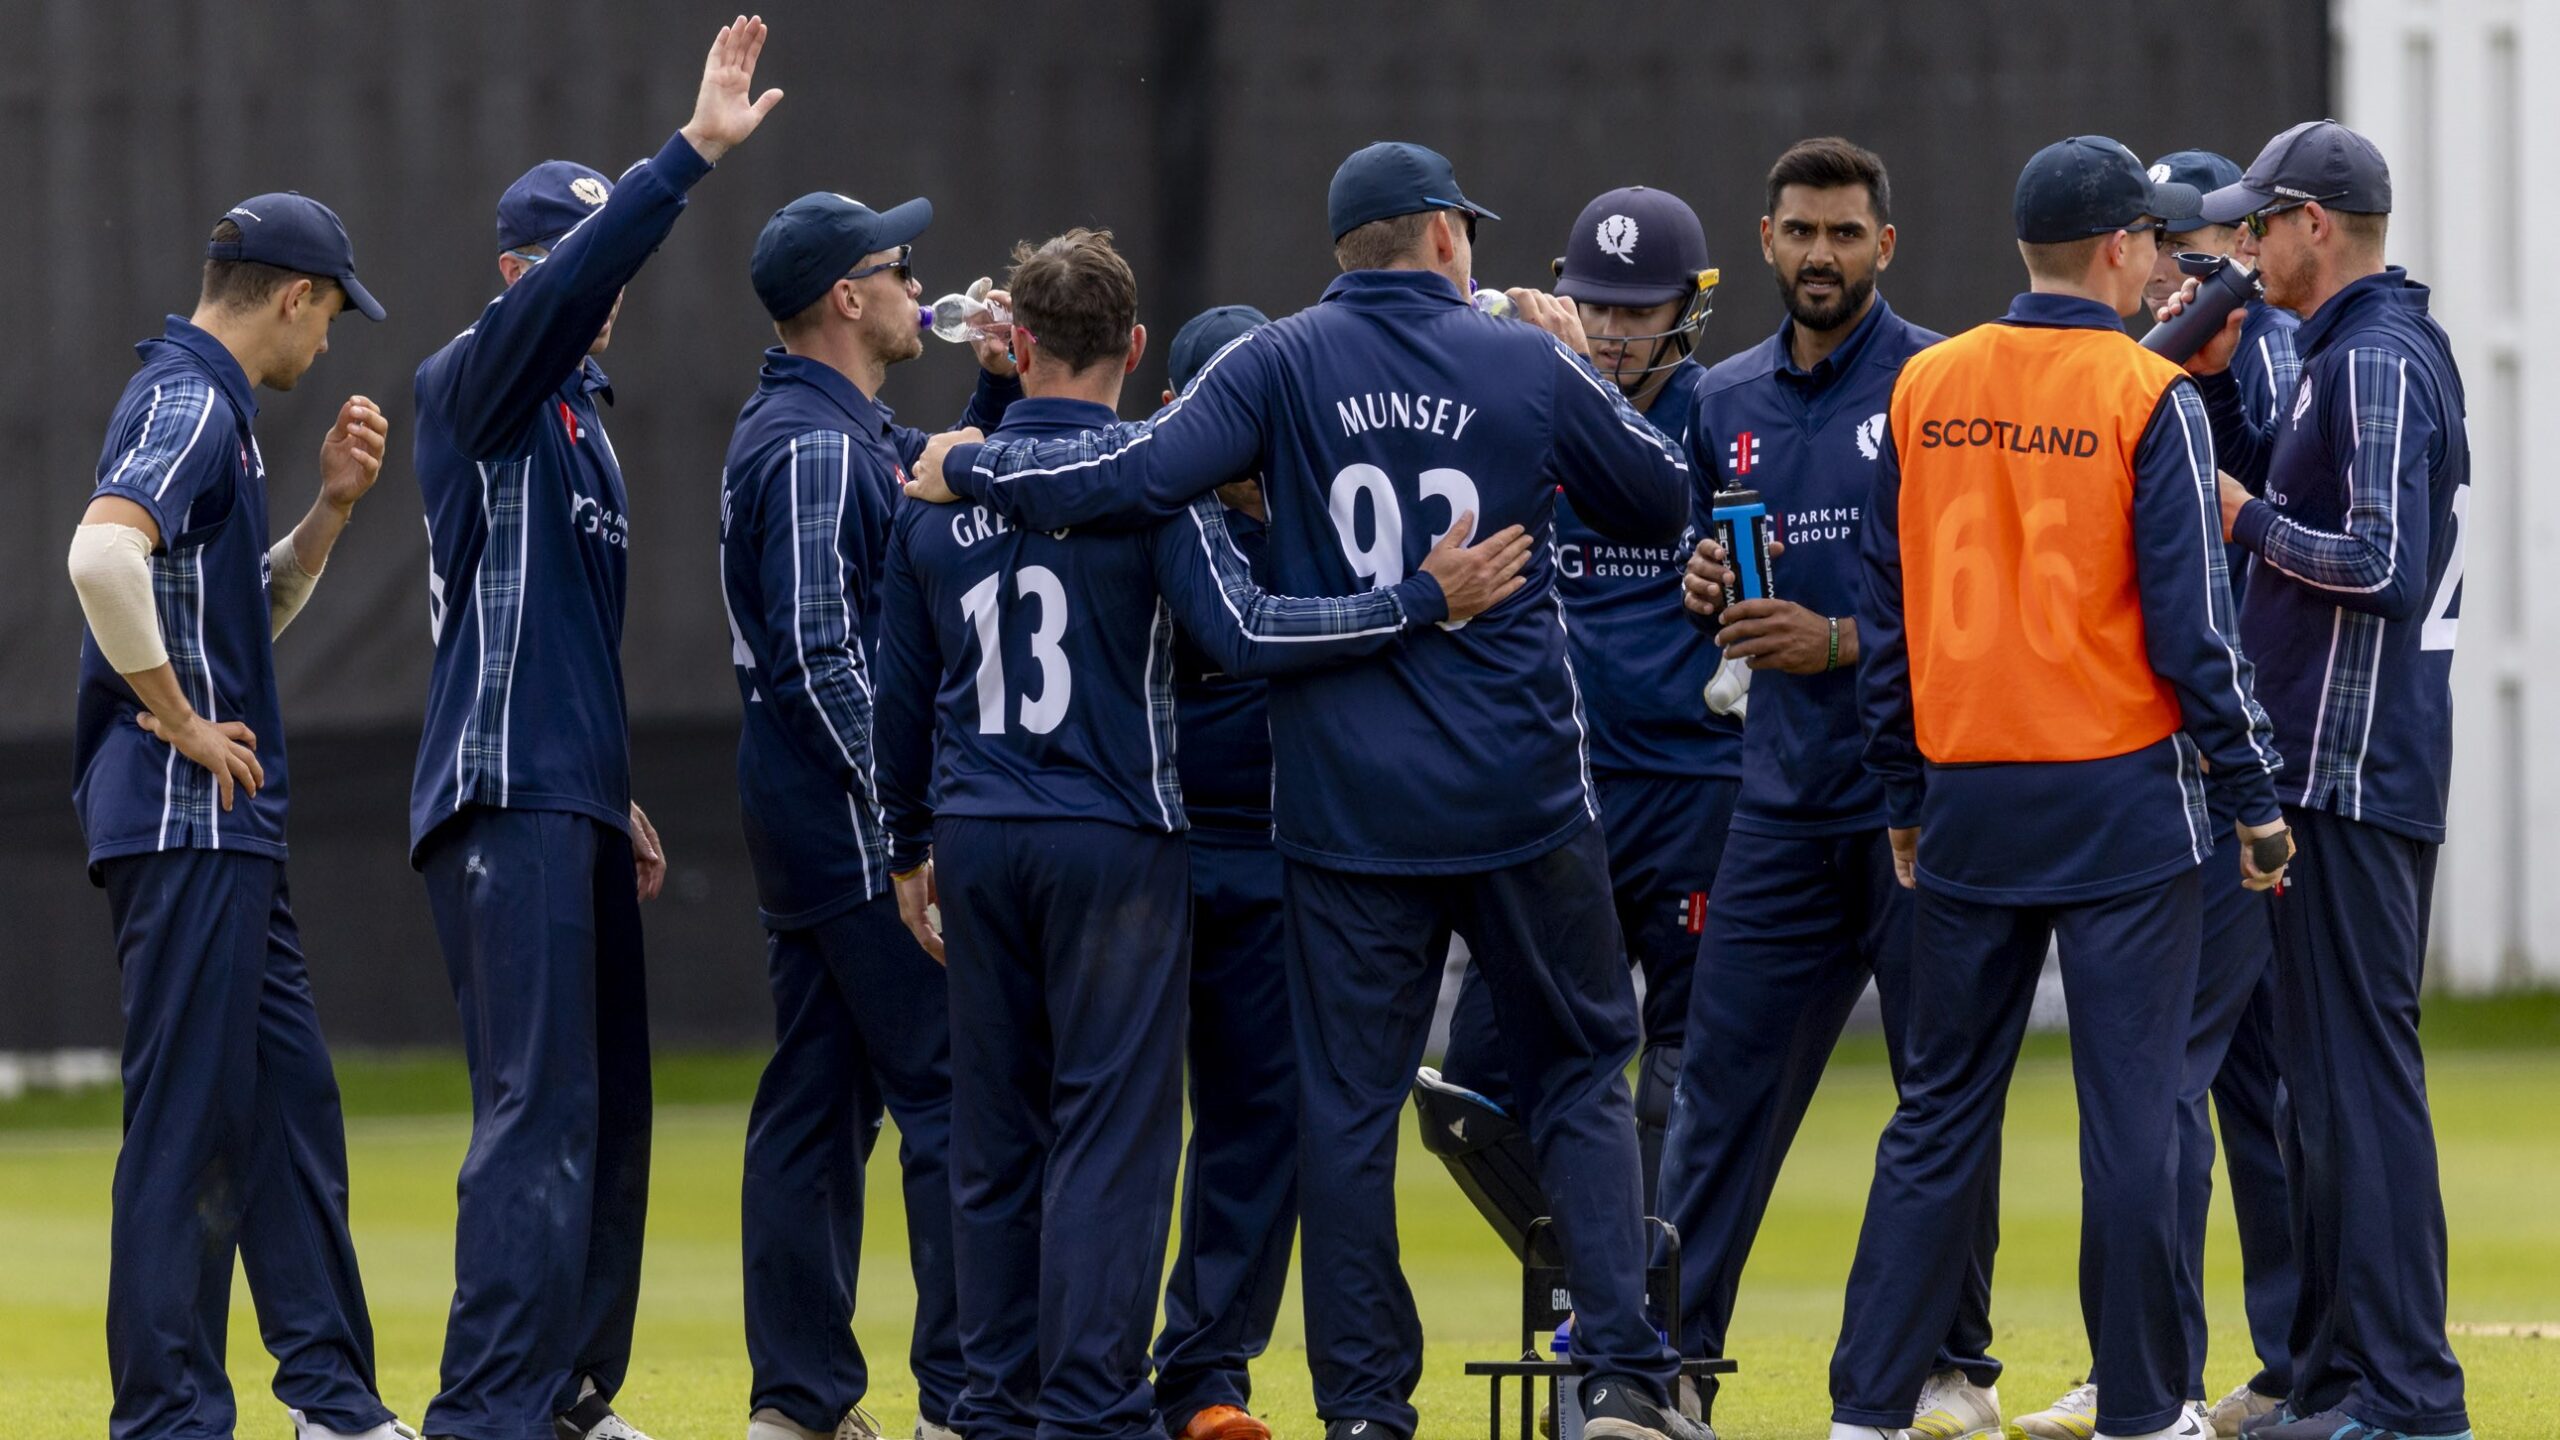 VIDEO: BEHIND THE SCENES – SCOTLAND MEN AT THE T20 WORLD CUP EUROPE QUALIFIER